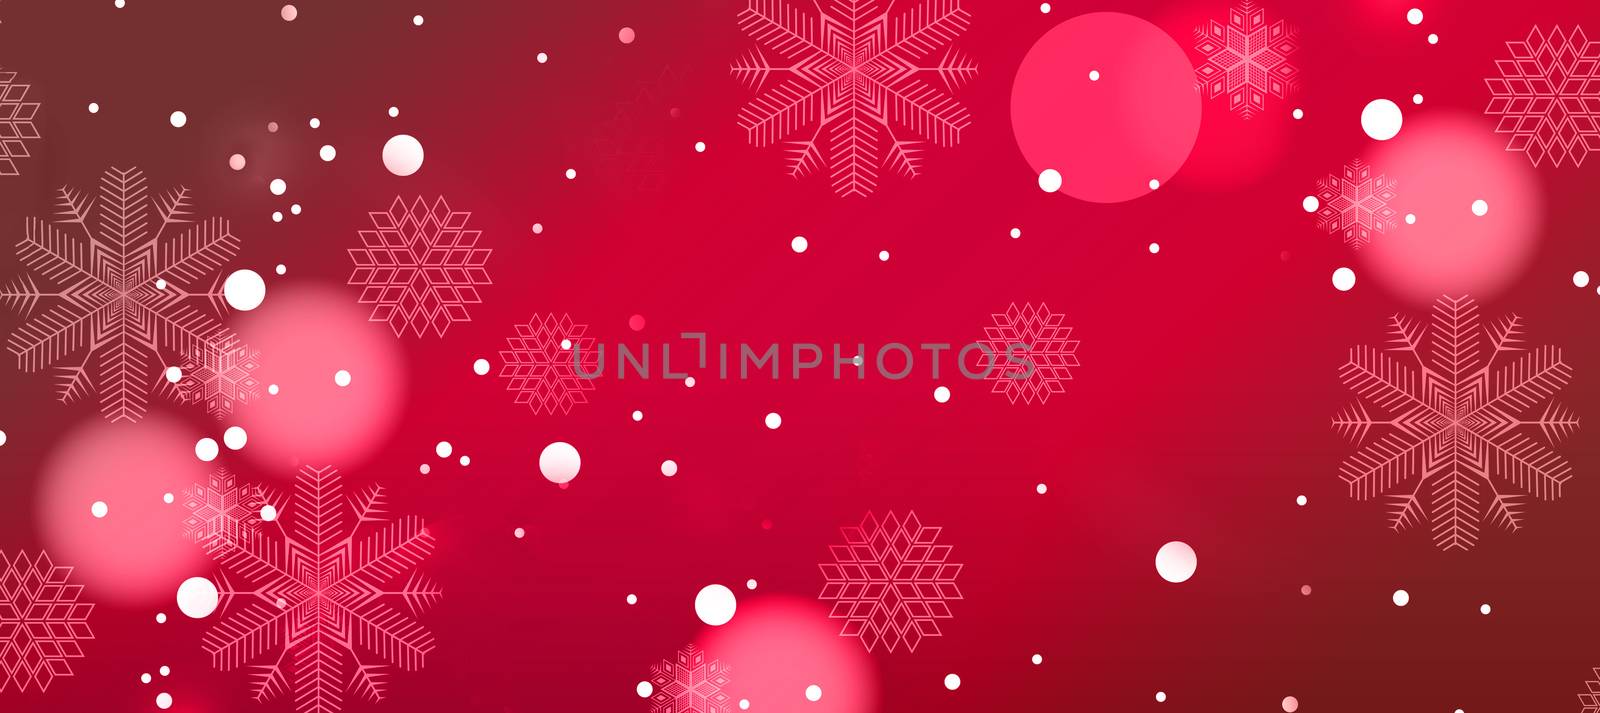 Bright background for a Christmas greeting card featuring bright elements with sparks.